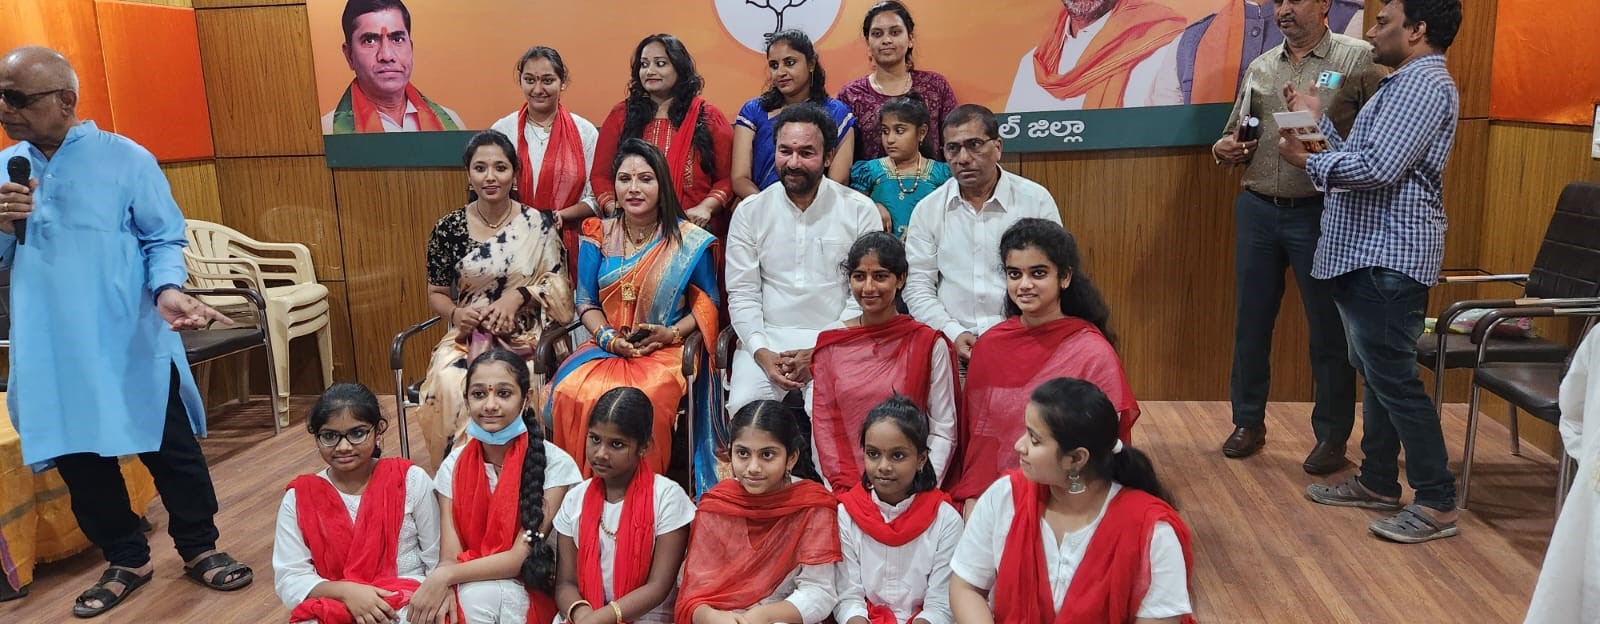 Preserving Indian Culture and Traditions for Future Generations: Kovida Sahrdaya Foundation's Petition Presented to Union Minister G. Kishan Reddy